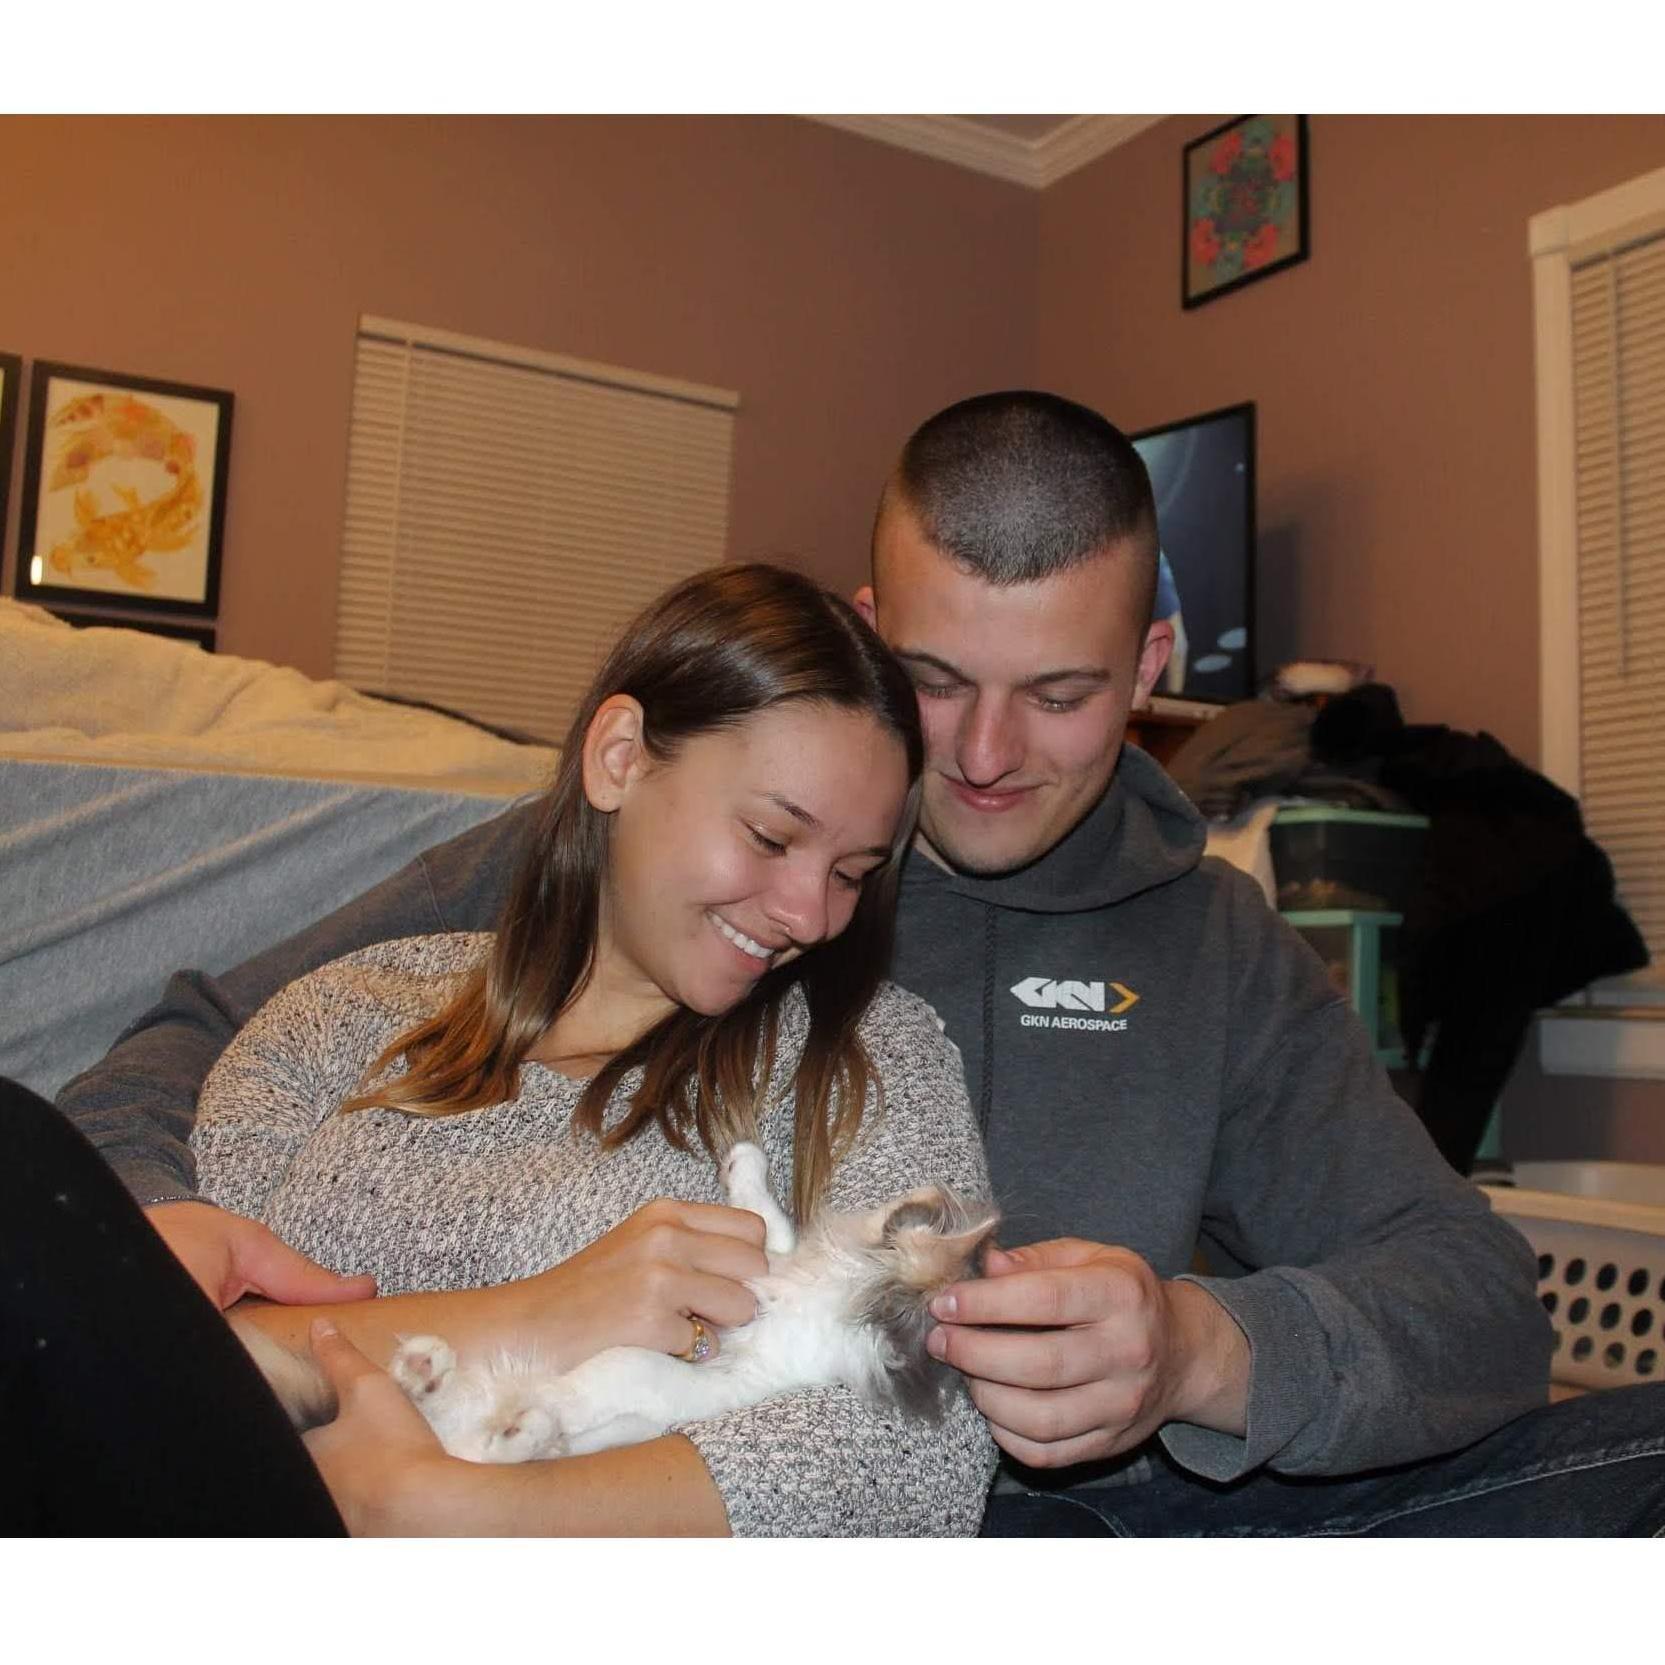 Our first family photo taken moments after Layla was brought home.